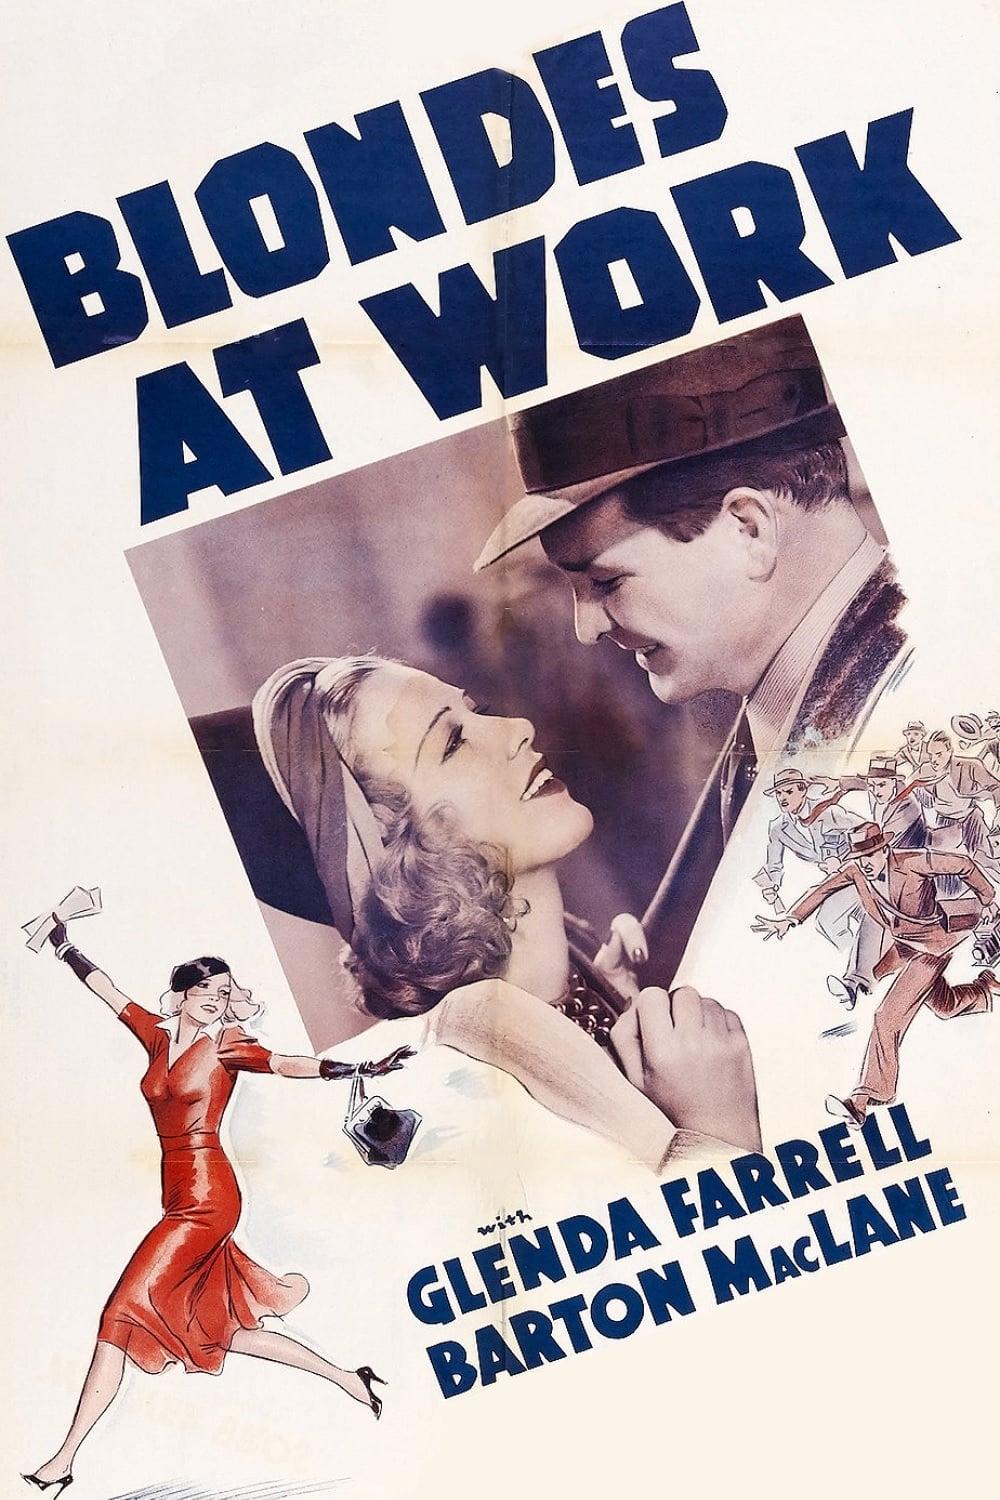 Blondes at Work poster